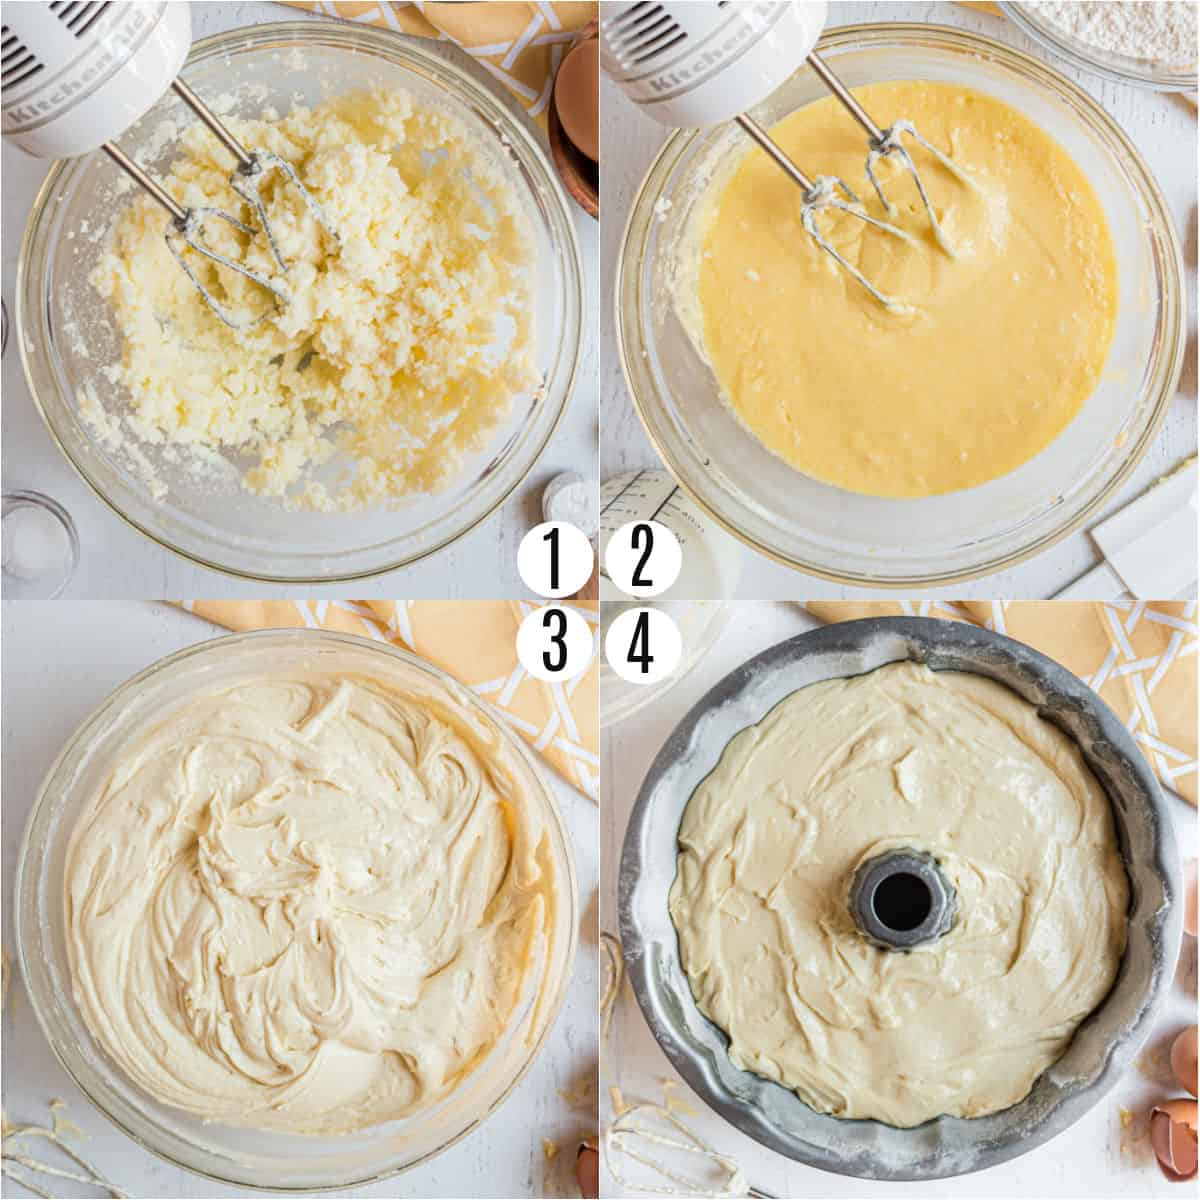 Step by step photos showing how to make kentucky butter cake.